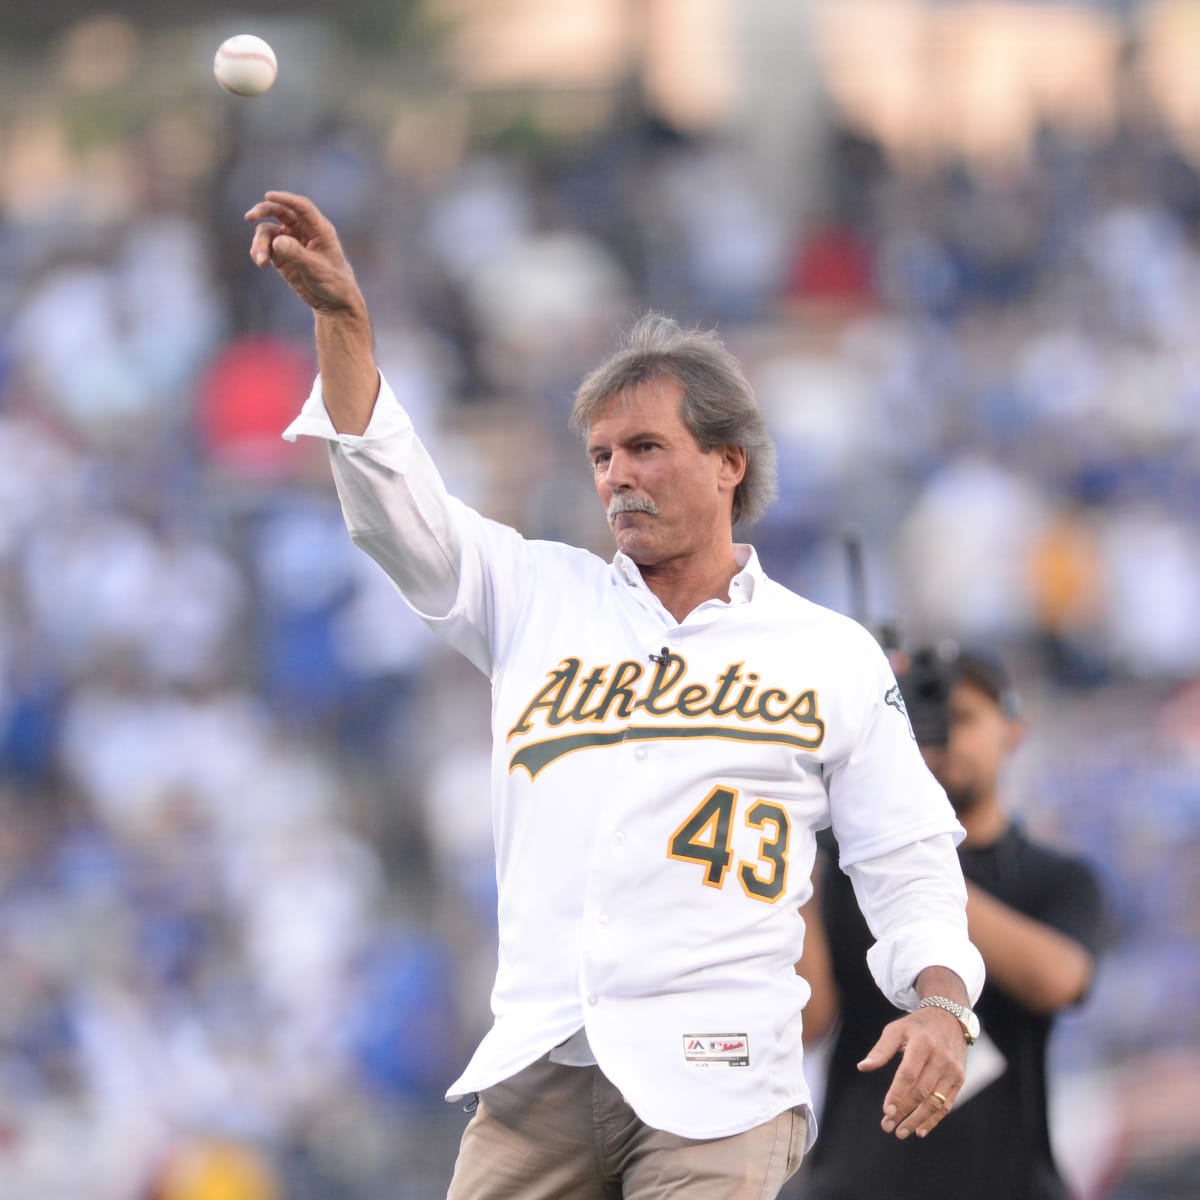 Affleckersley … or why the careers of Dennis Eckersley and Ben